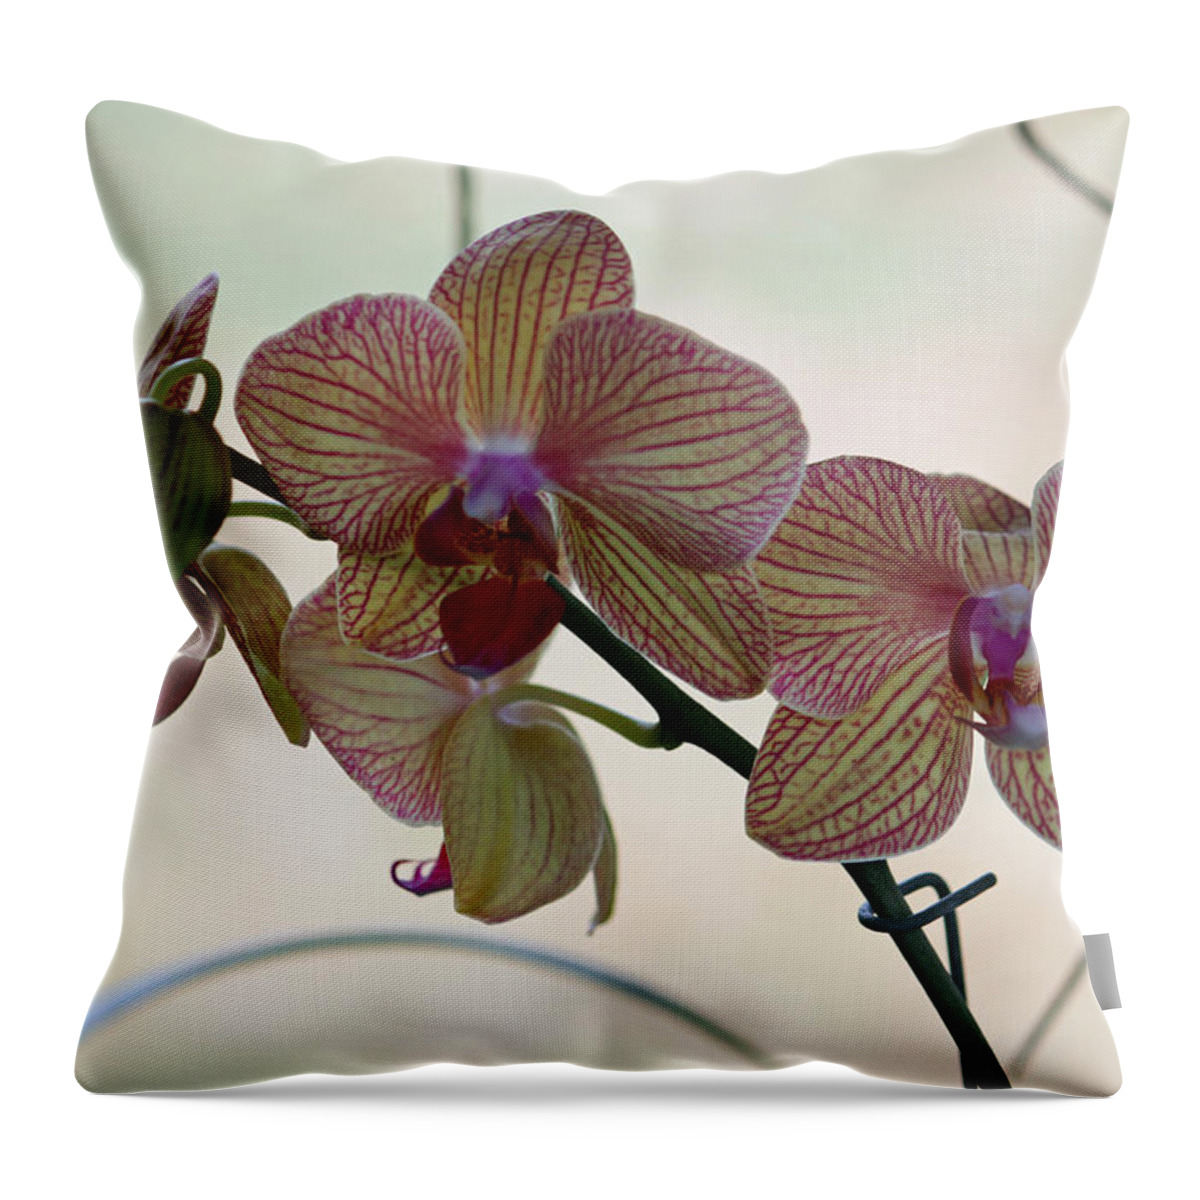 Orchid Throw Pillow featuring the photograph Orchid Series by Suzanne Gaff